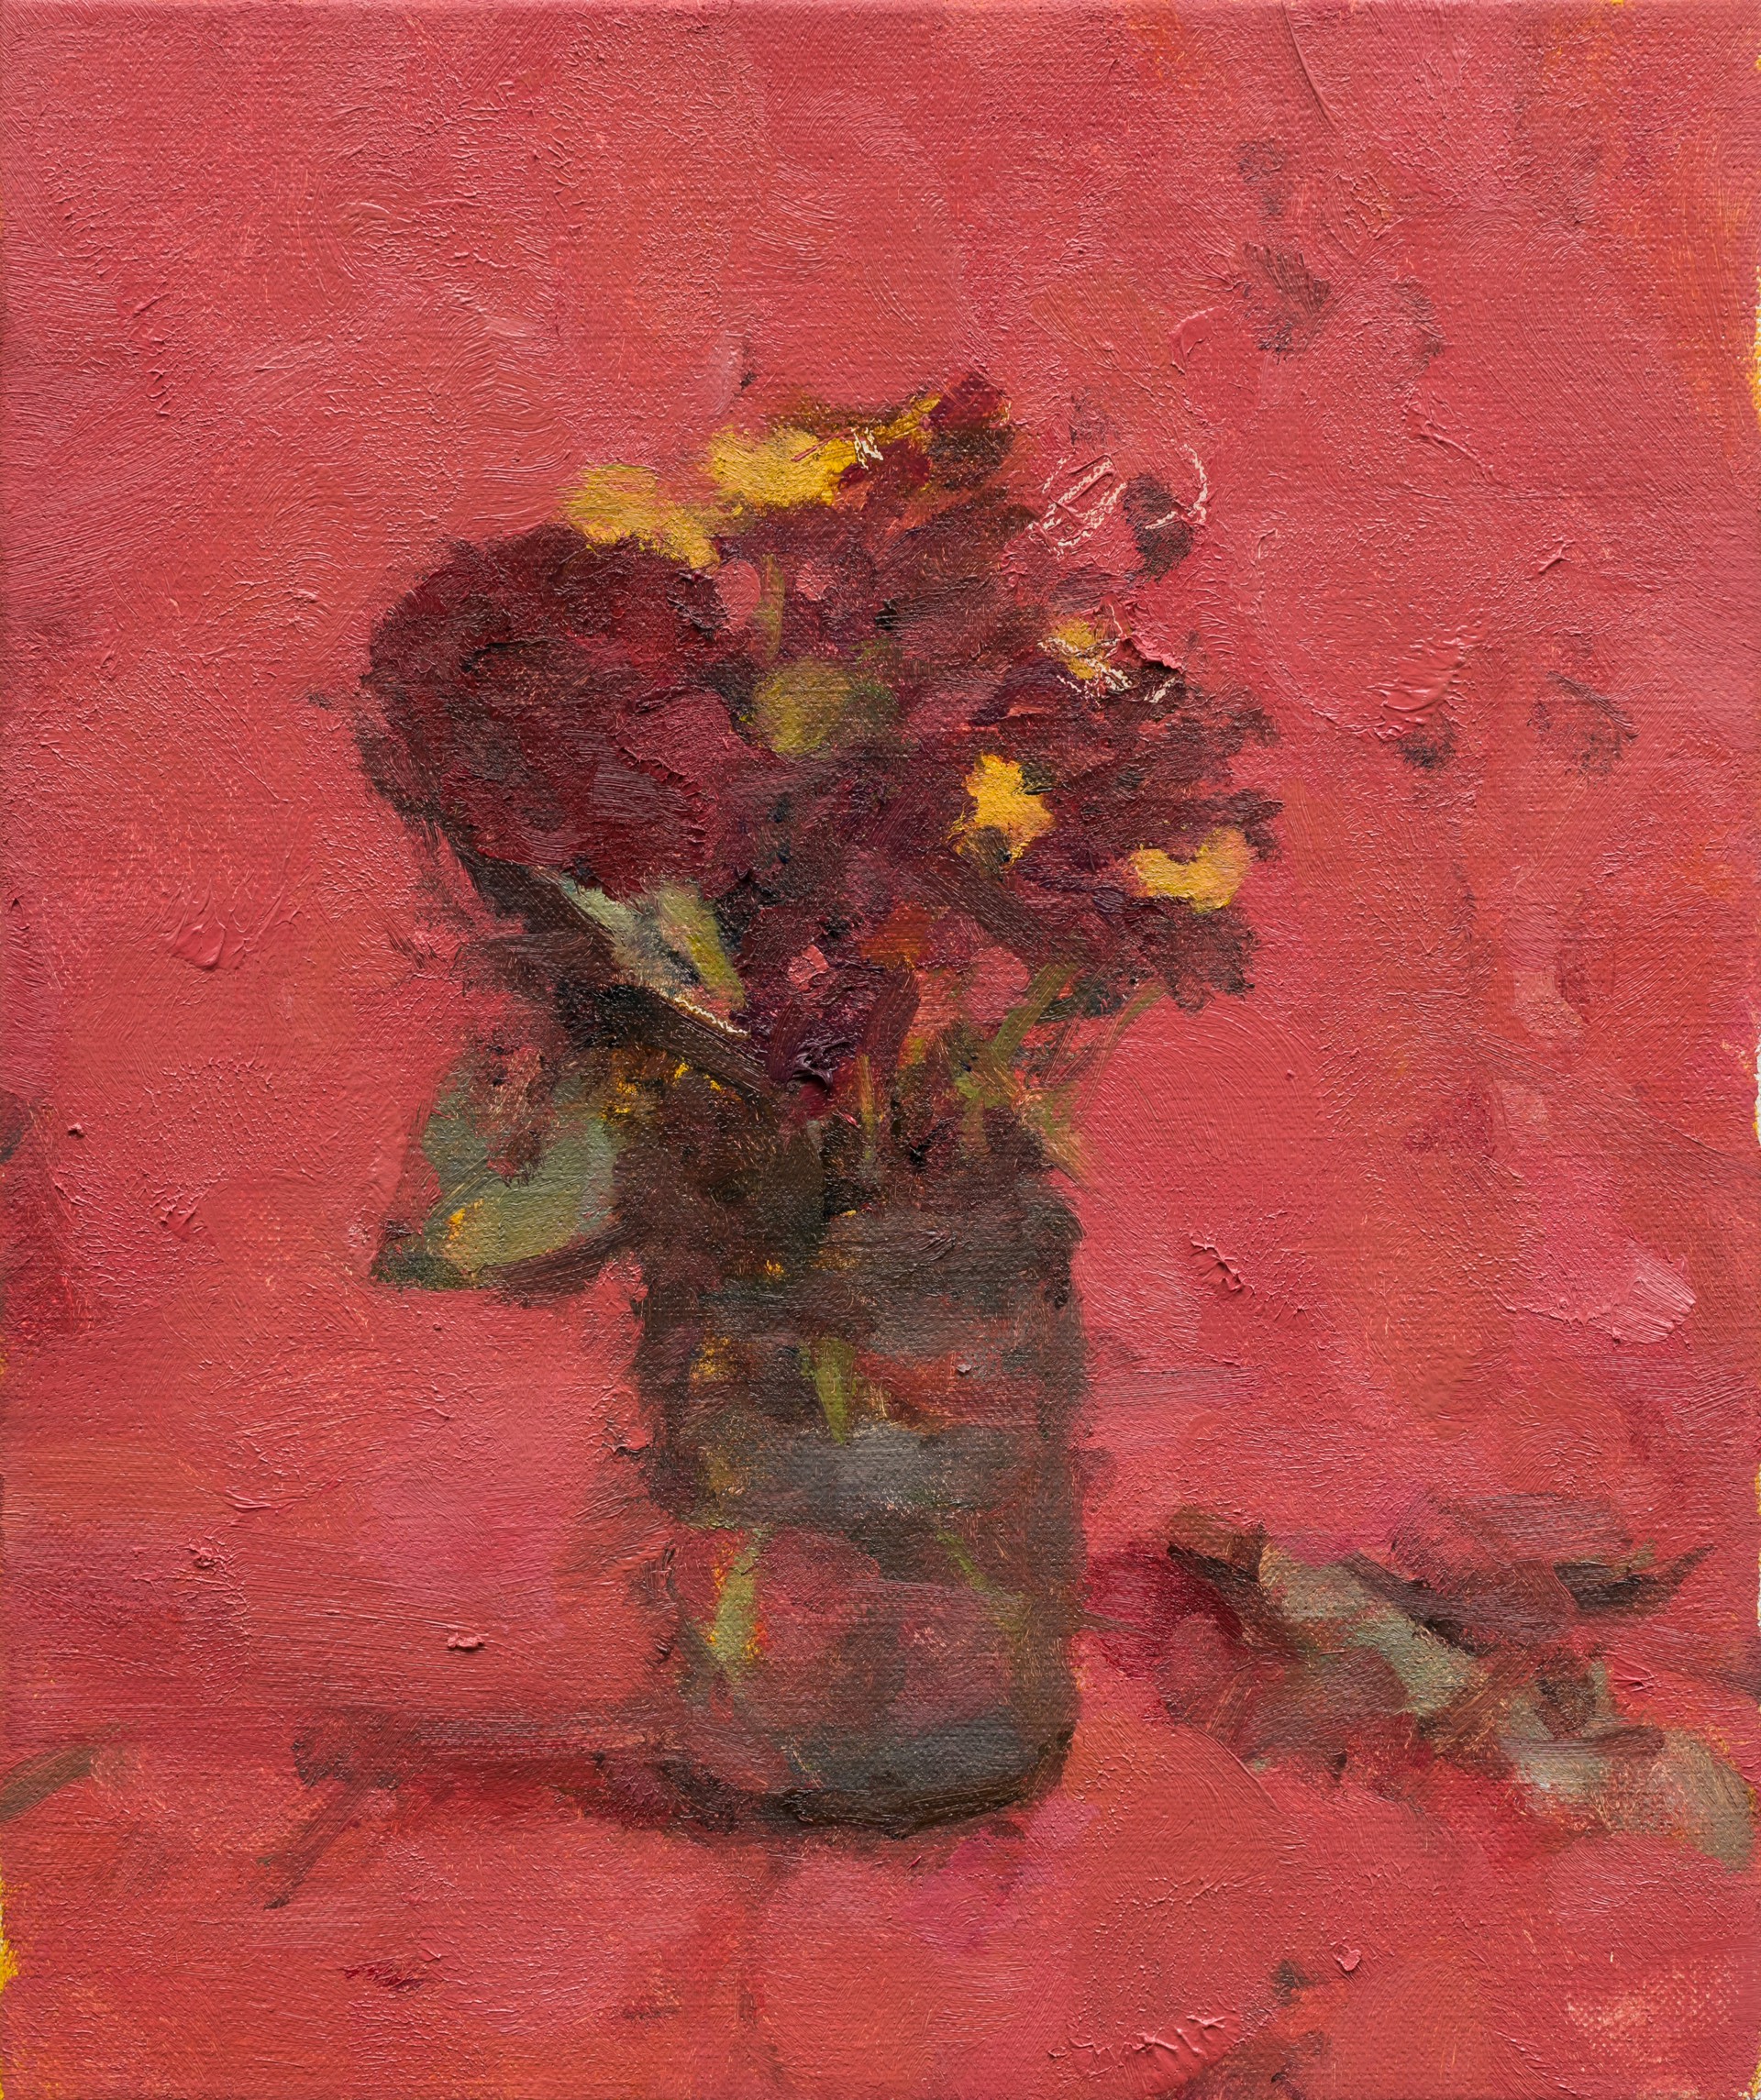 Still Life with Flowers VII by Jordan Wolfson